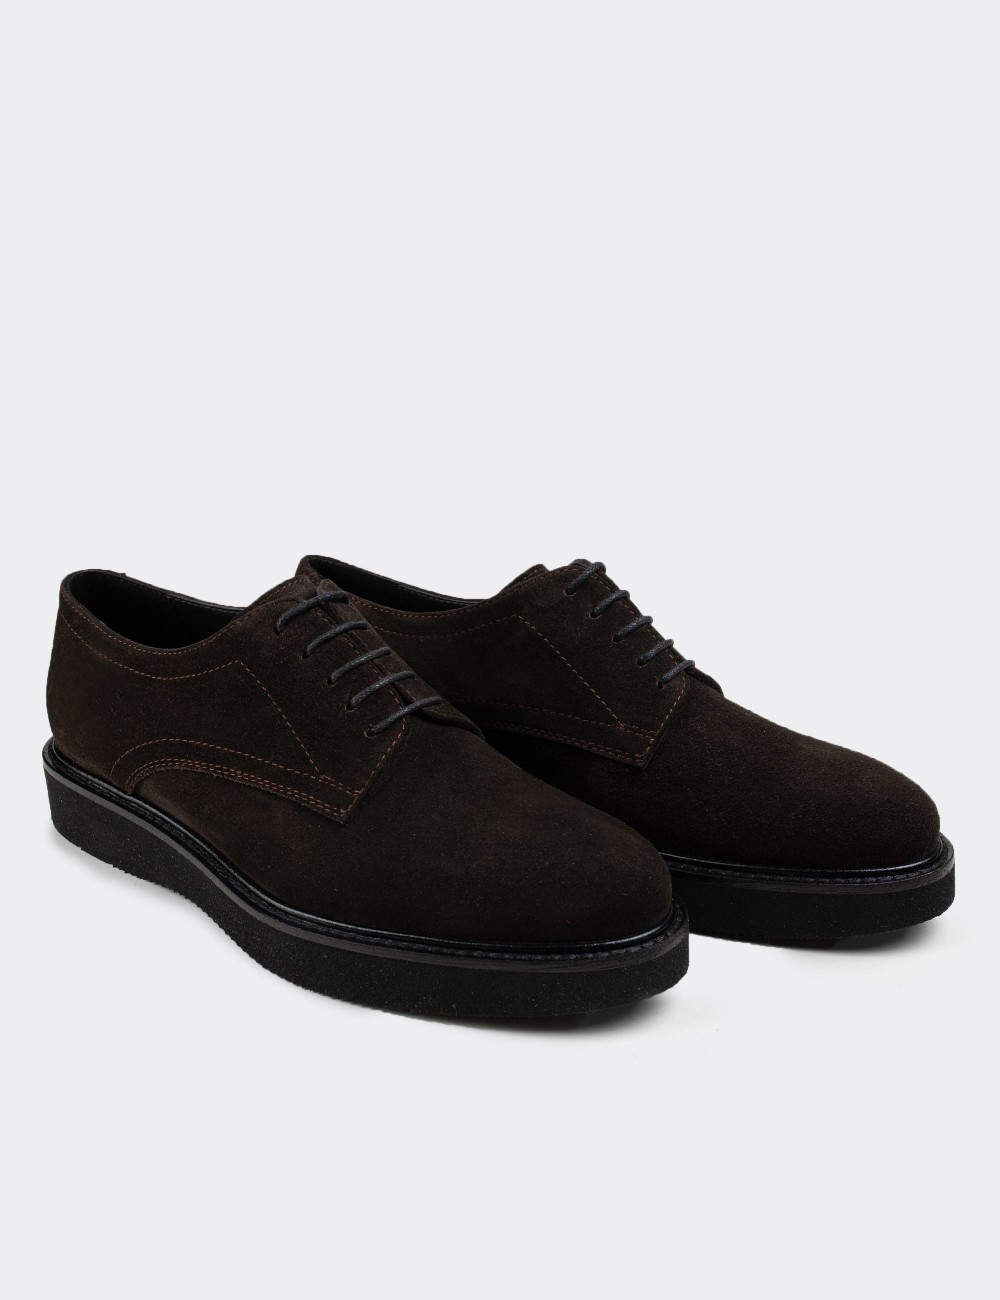 Brown Suede Leather Lace-up Shoes - 01430ZKHVE06